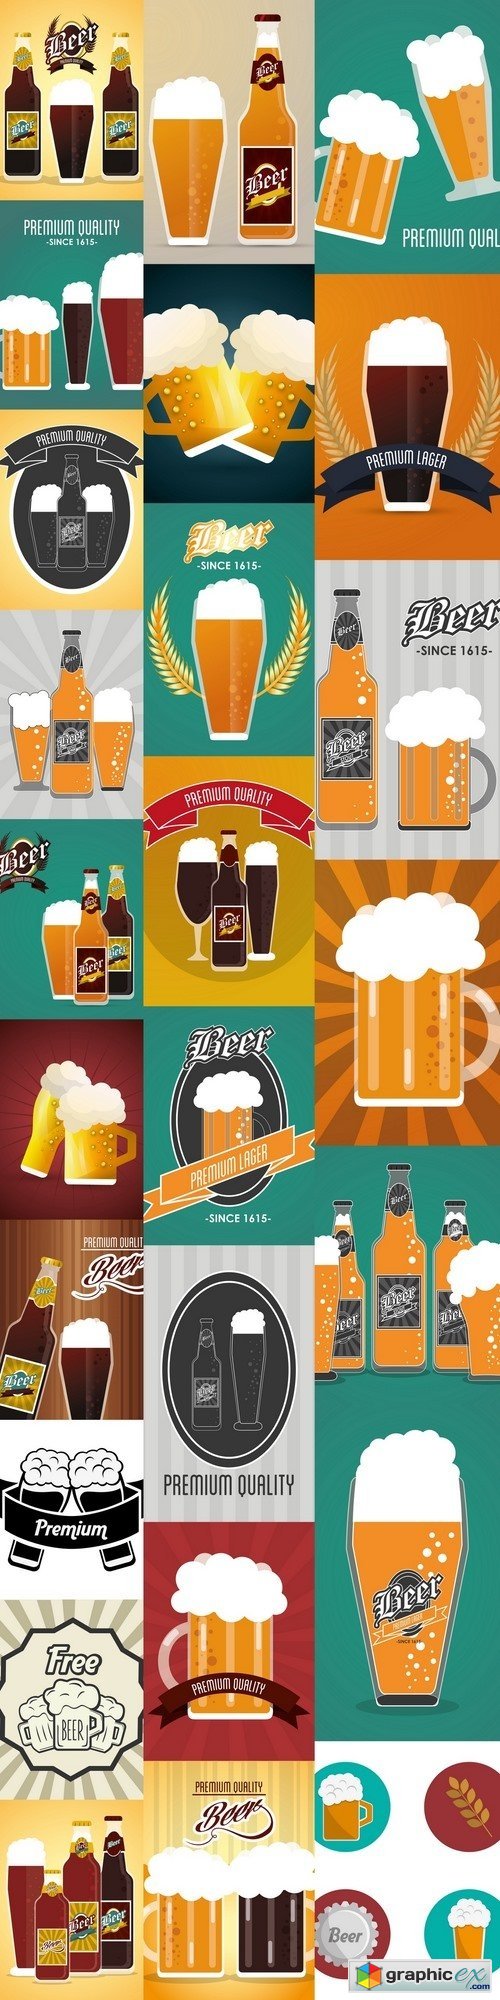 Beer icon design 3